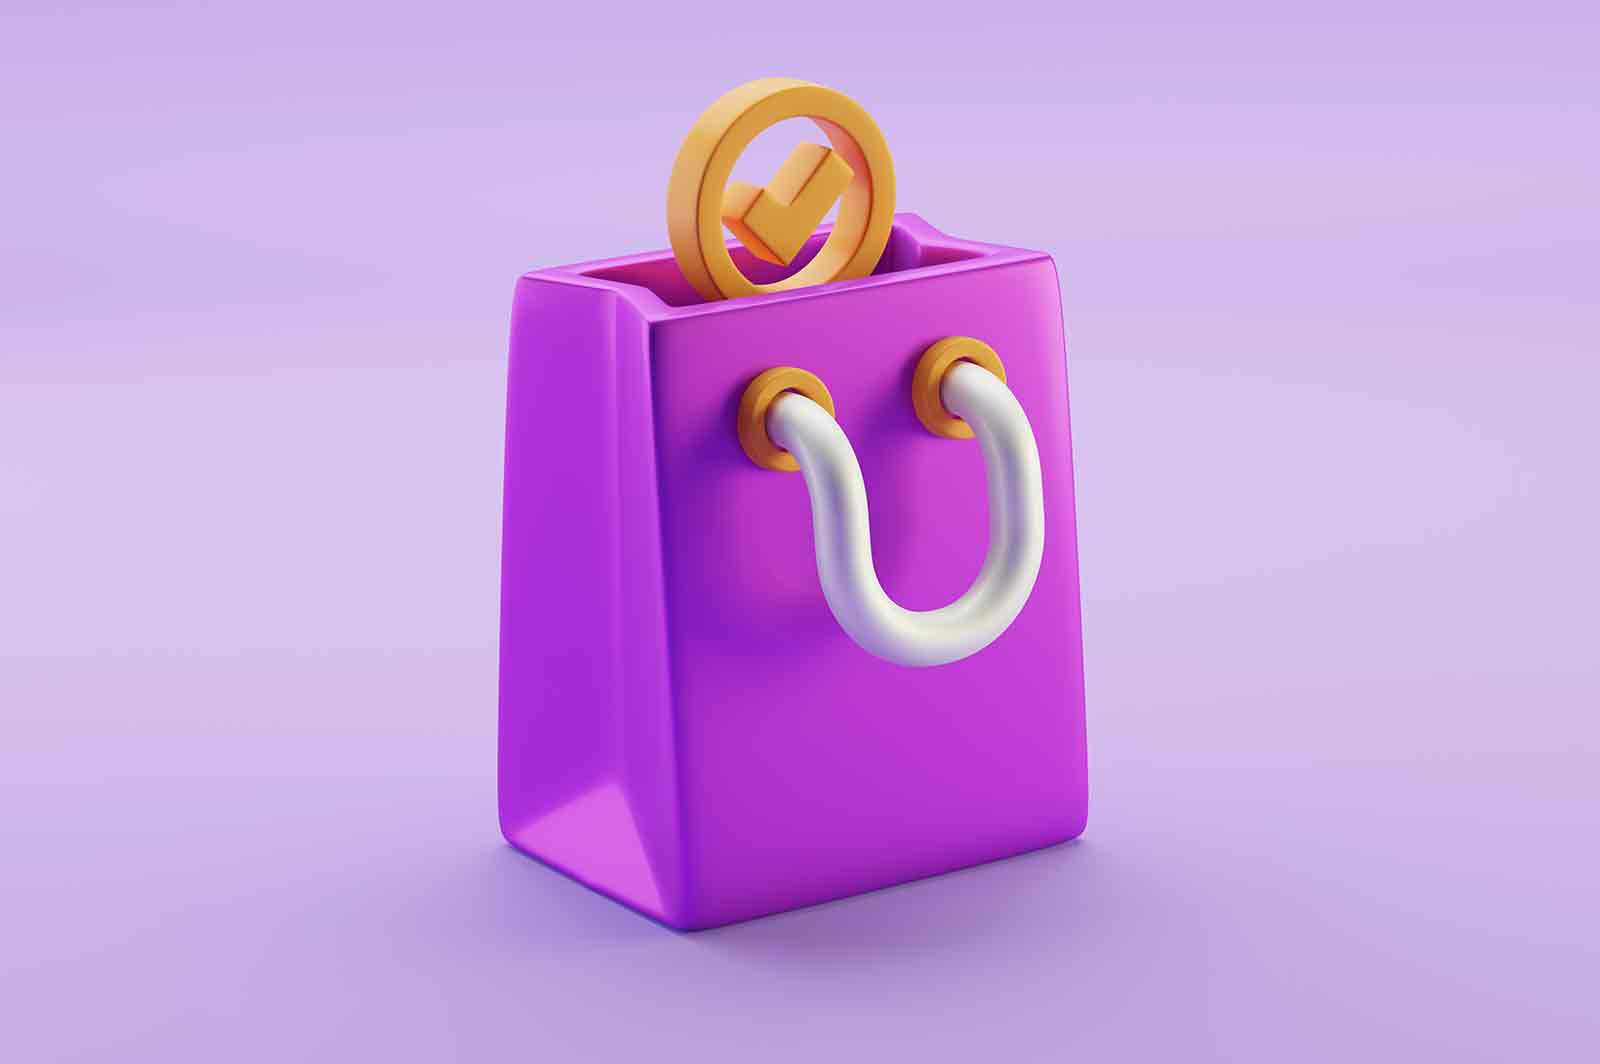 Shopping bag 3d rendered icon illustration. Handbag or package. Sale, discount and promotion, purchasing goods online concept